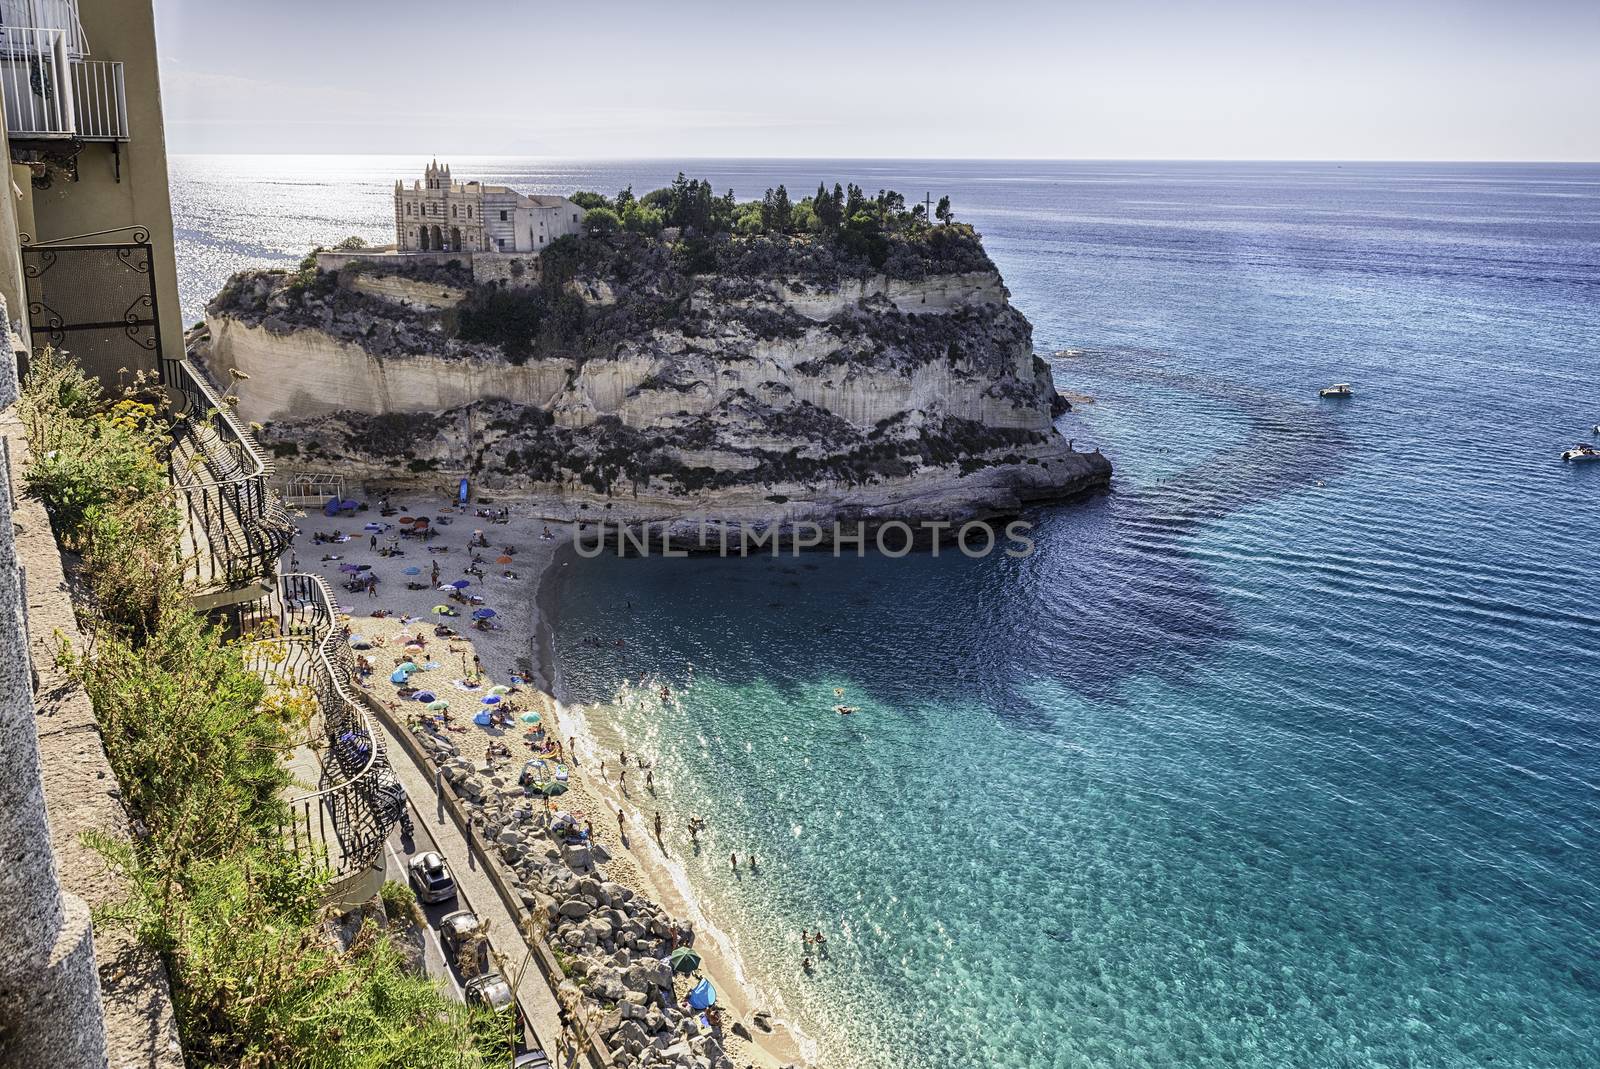 View over Isola Bella Beach, iconic seaside place in Tropea, a seaside resort located on the Gulf of Saint Euphemia, part of the Tyrrhenian Sea, Calabria, Italy